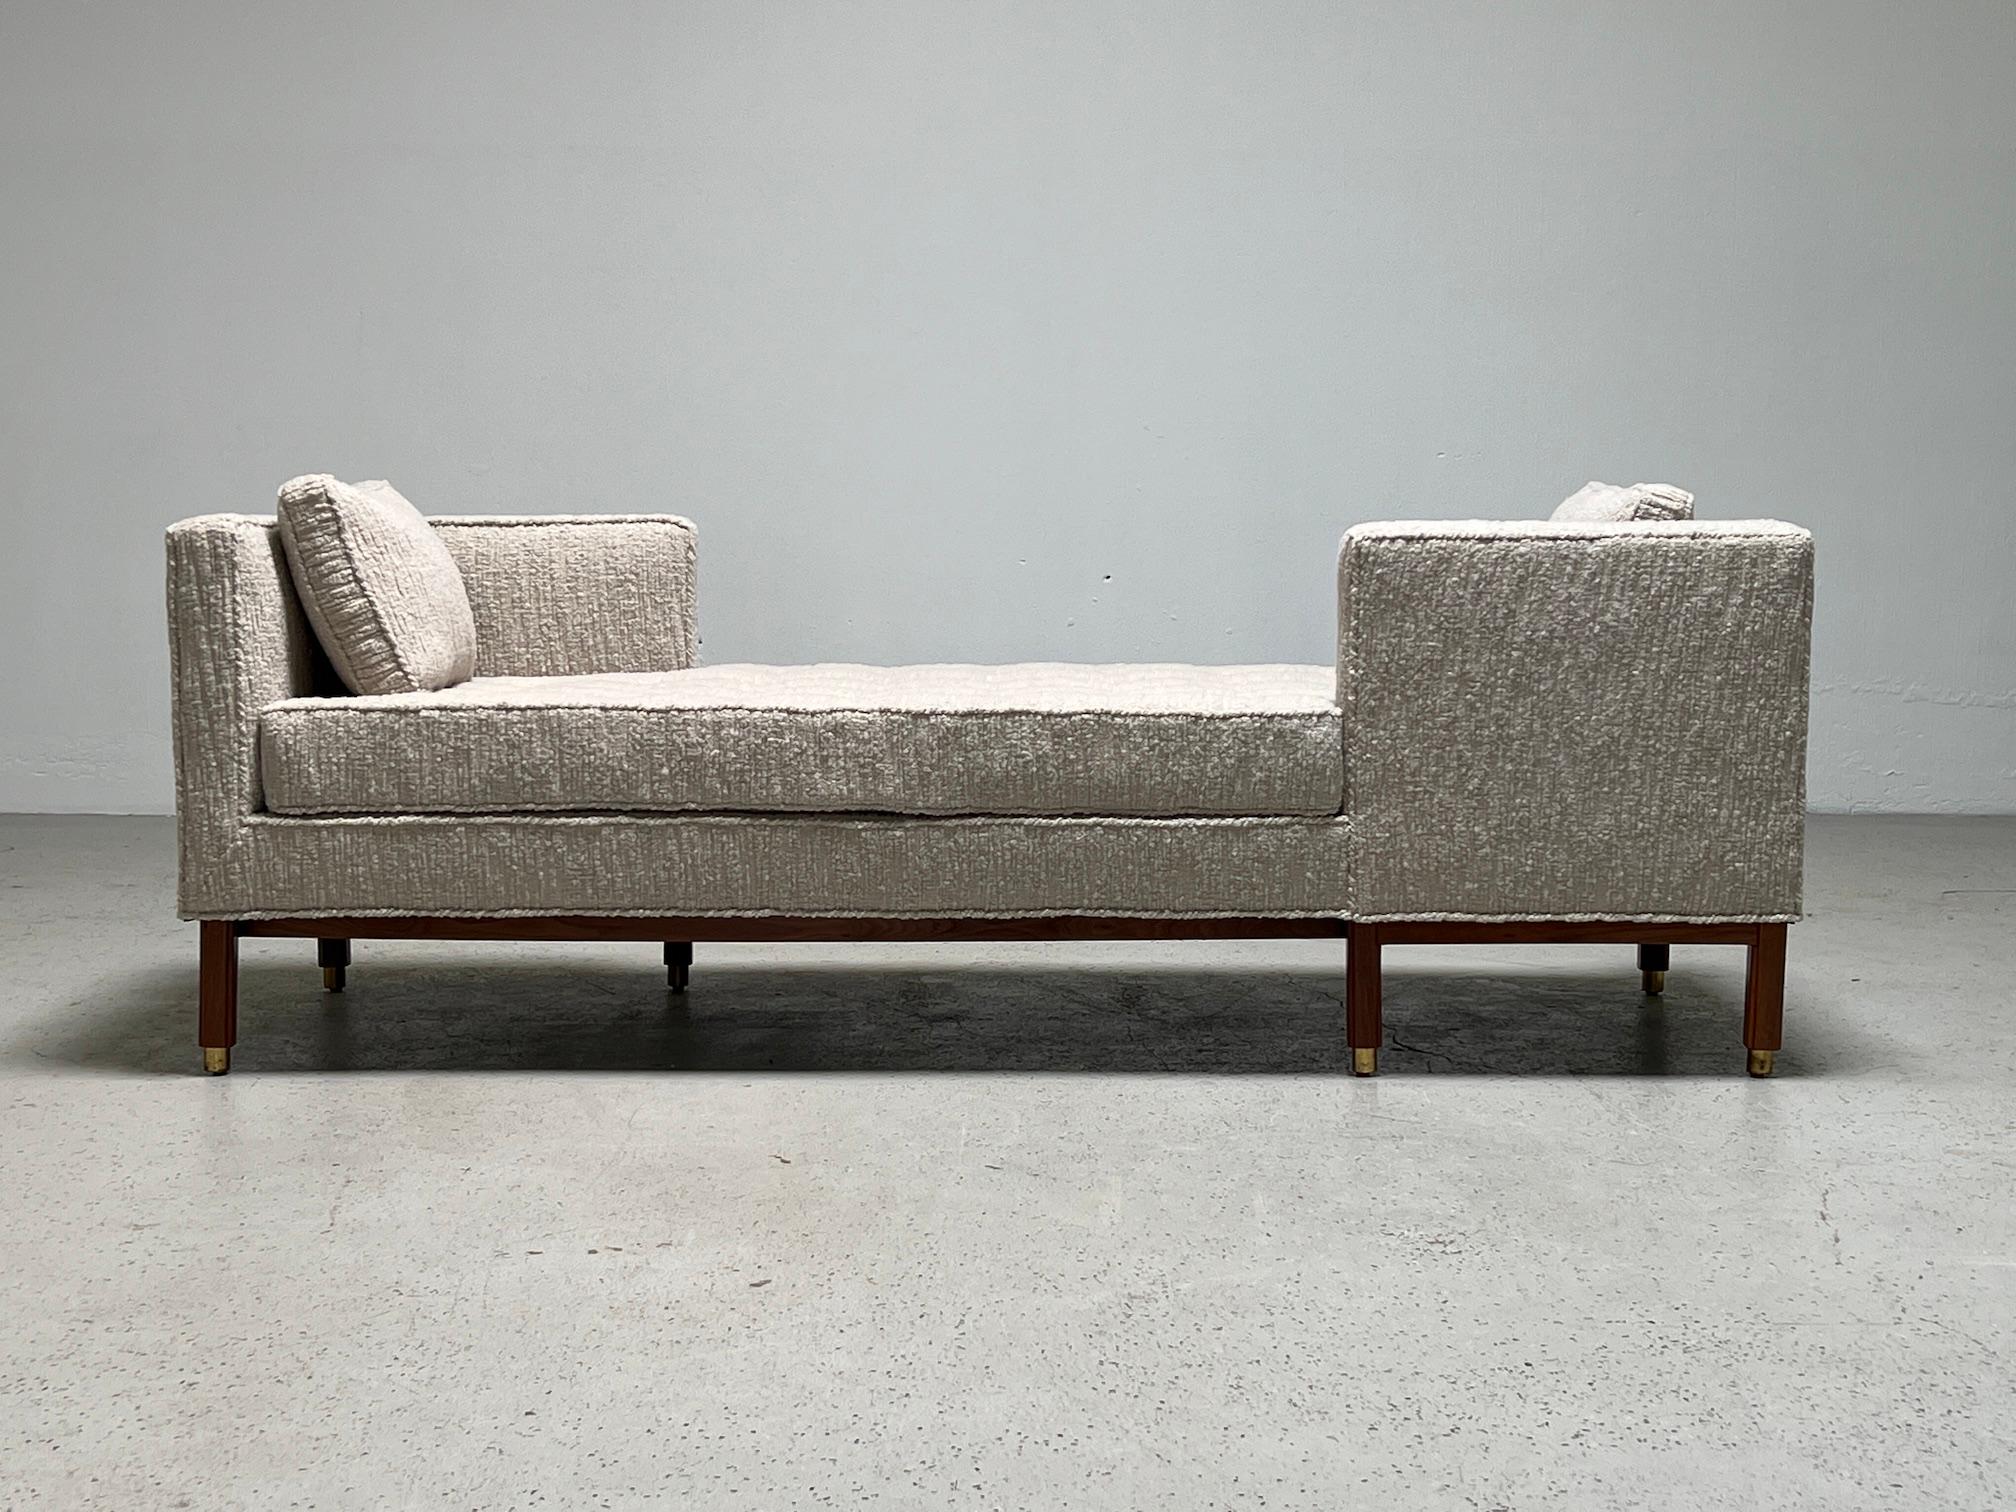 Tete-a-Tete sofa / daybed with walnut base and brass feet. Reupholstered in Holly hunt Riccardo/Champagne fabric. Designed by Edward Wormley for Dunbar. 